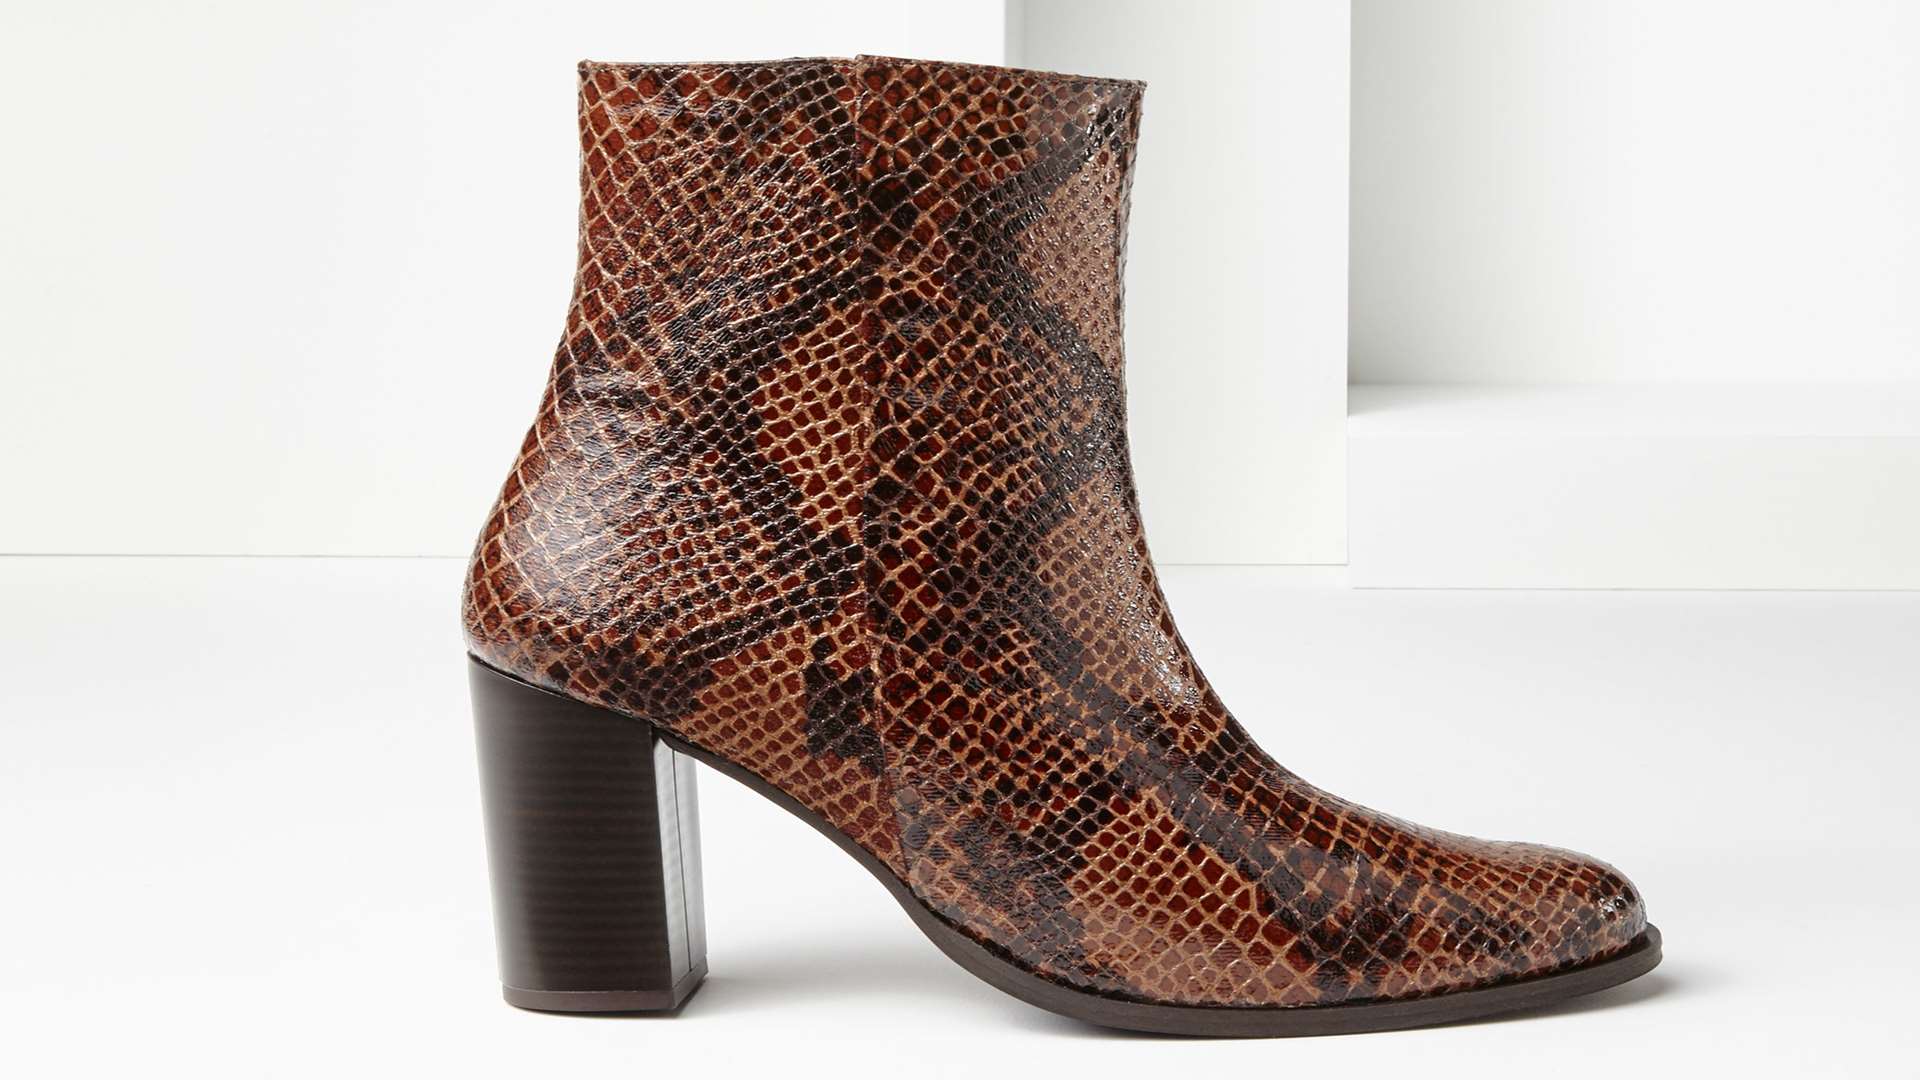 La Redoute Atelier R python leather boots, currently reduced to £59.40 from £99